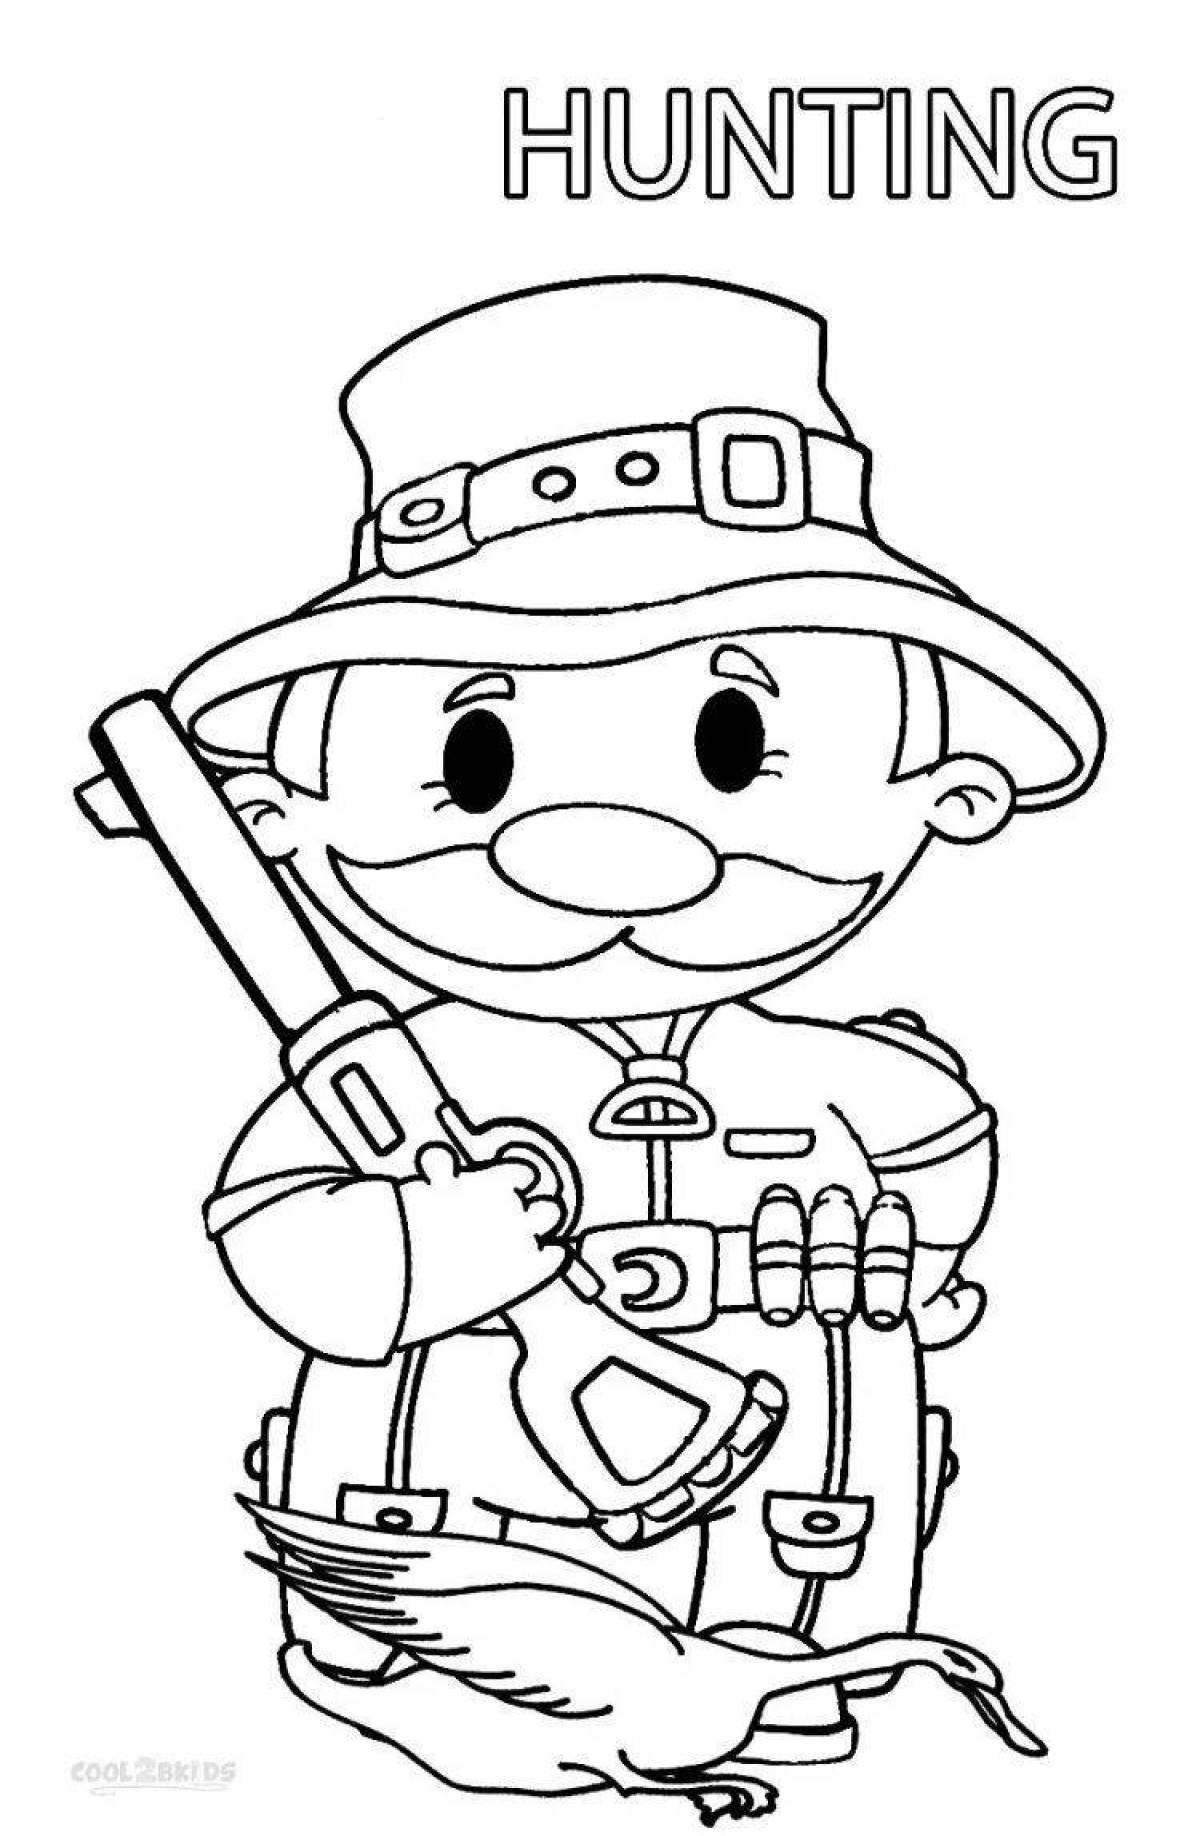 Dazzling hunter coloring page for kids